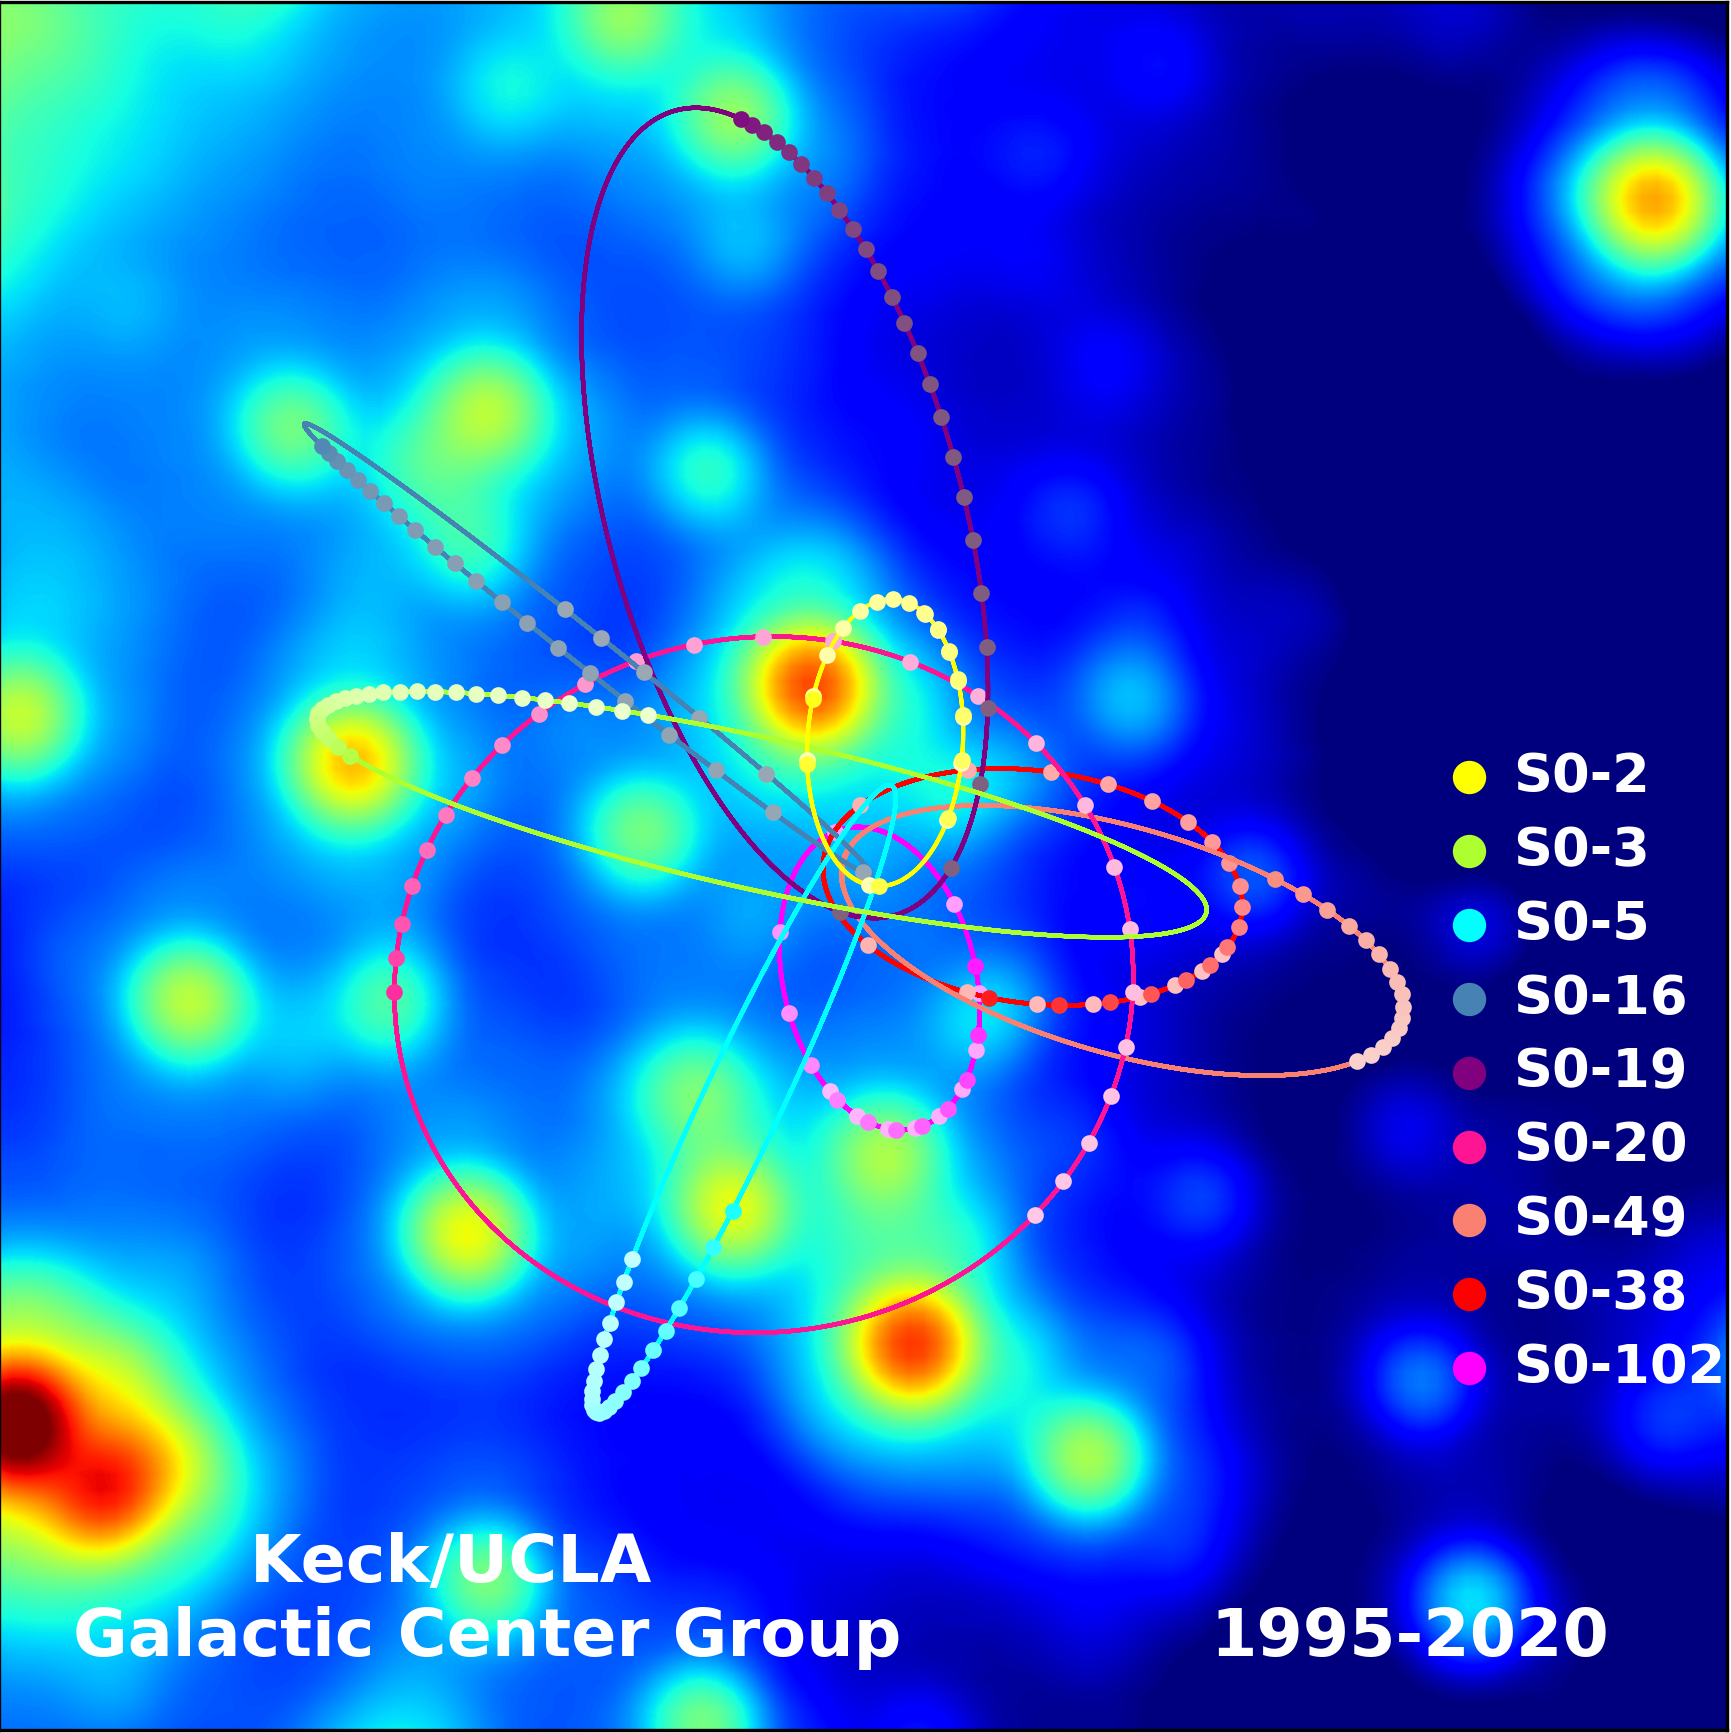 The orbits of stars within the central 1.0 X 1.0 arcseconds of our Galaxy. In the background, the central portion of a diffraction-limited image taken in 2015 is displayed. While every star in this image has been seen to move over the past 20 years, estimates of orbital parameters are best constrained for stars that have been observed through at least one turning point of their orbit. The annual average positions for these stars are plotted as colored dots, which have increasing color saturation with time. Also plotted are the best fitting simultaneous orbital solutions. (This image was created by Prof. Andrea Ghez and her research team at UCLA and are from data sets obtained with the W. M. Keck Telescopes.)